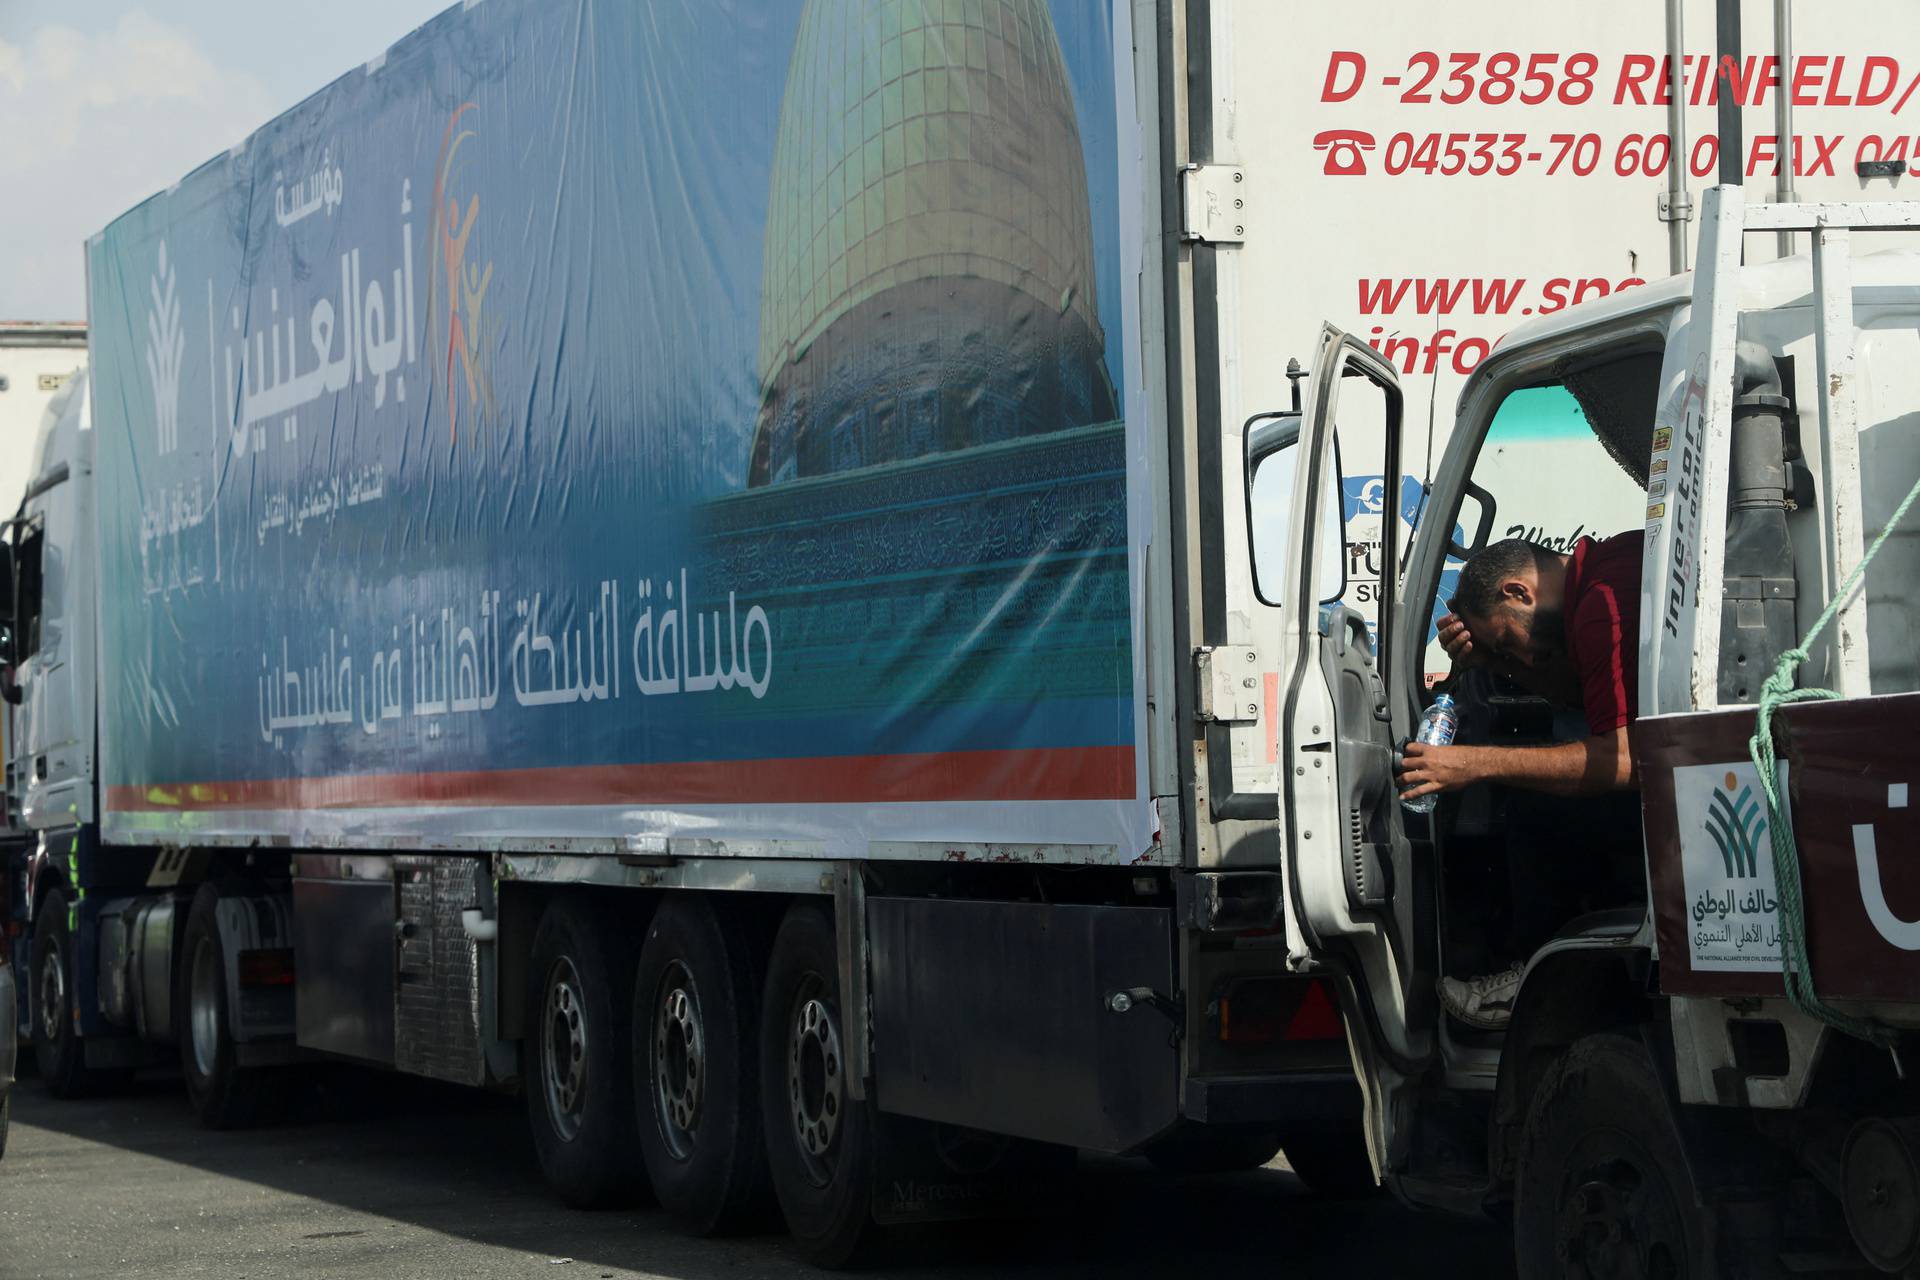 Trucks carrying humanitarian aid to Palestinians are waiting on the desert road (Cairo - Ismailia) on their way to the Rafah crossing